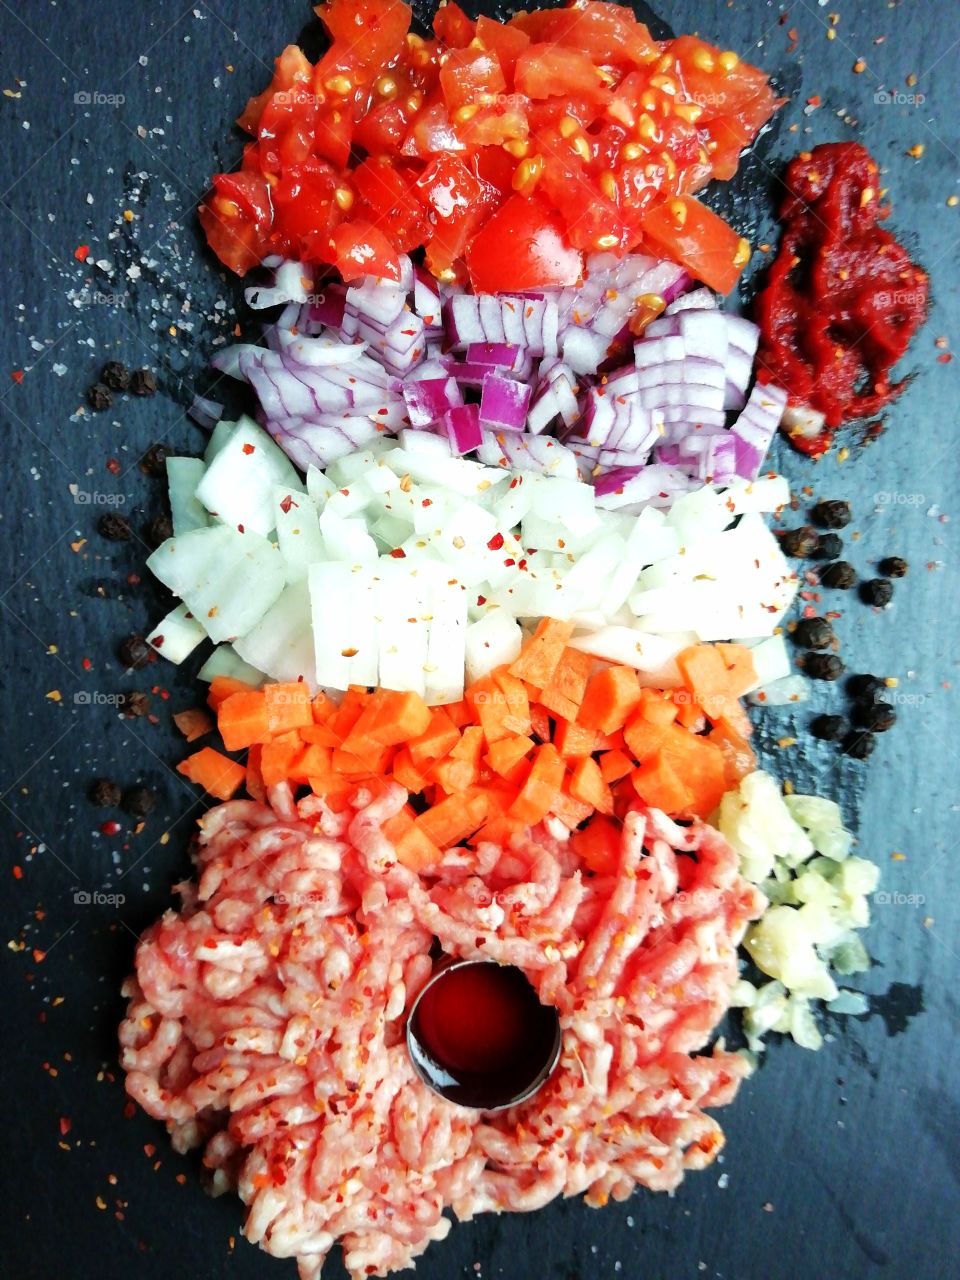 Raw ingredients for a meat sauce